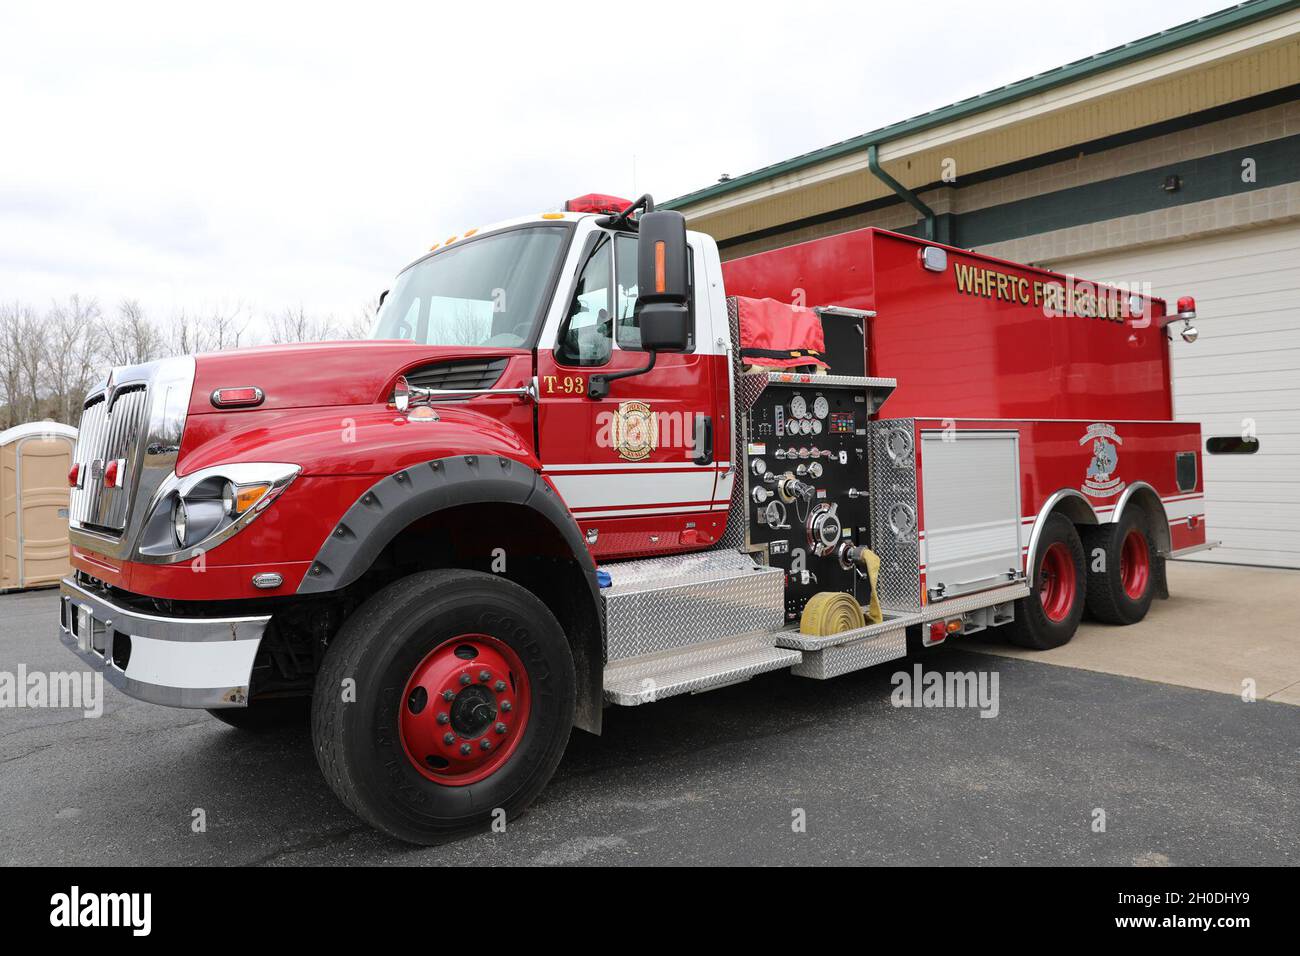 A Fire truck is displayed during a deployment ceremony for the 177th Fire Fighting Team at Wendell H. Ford Regional Training Center, Greenville, Ky., 2 Feb. The unit is slated to deploy in support of Operation Freedom’s Sentinel and will be stationed in Eastern Europe. Stock Photo